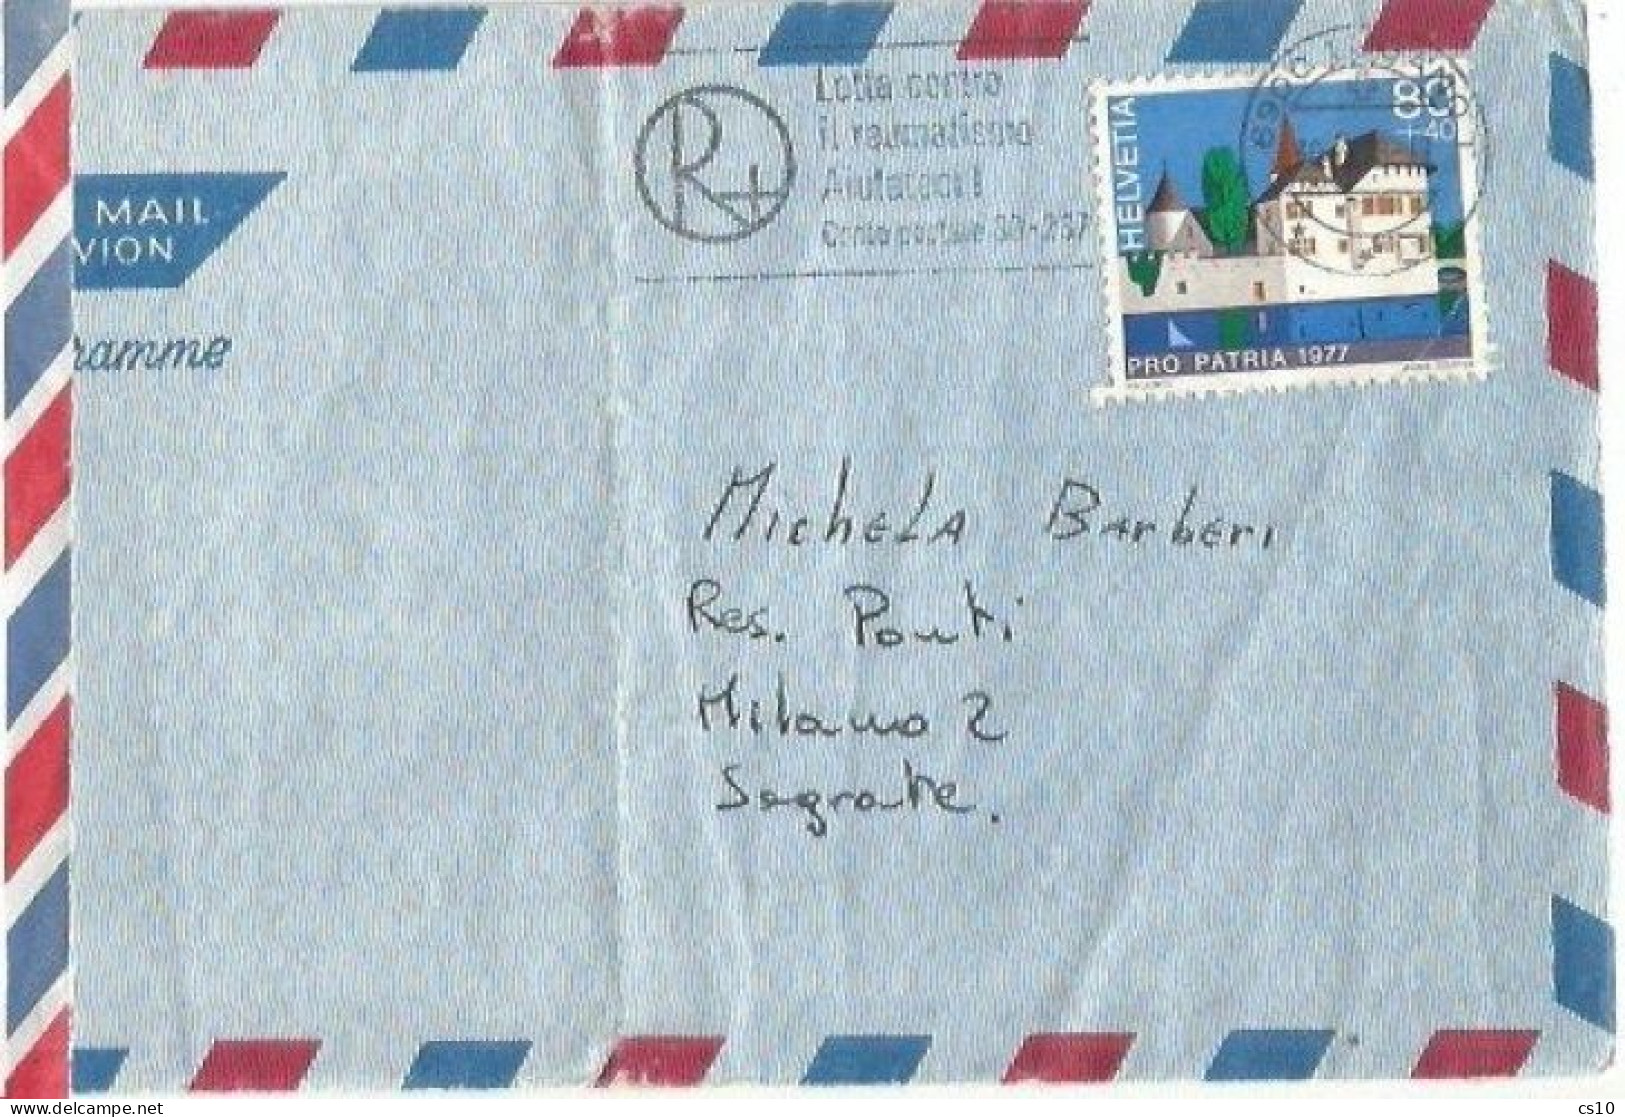 Suisse Airmail Cover Lugano 30aug1978 To Italy With ProPatria 1977 C.80+40 Solo Franking - Storia Postale